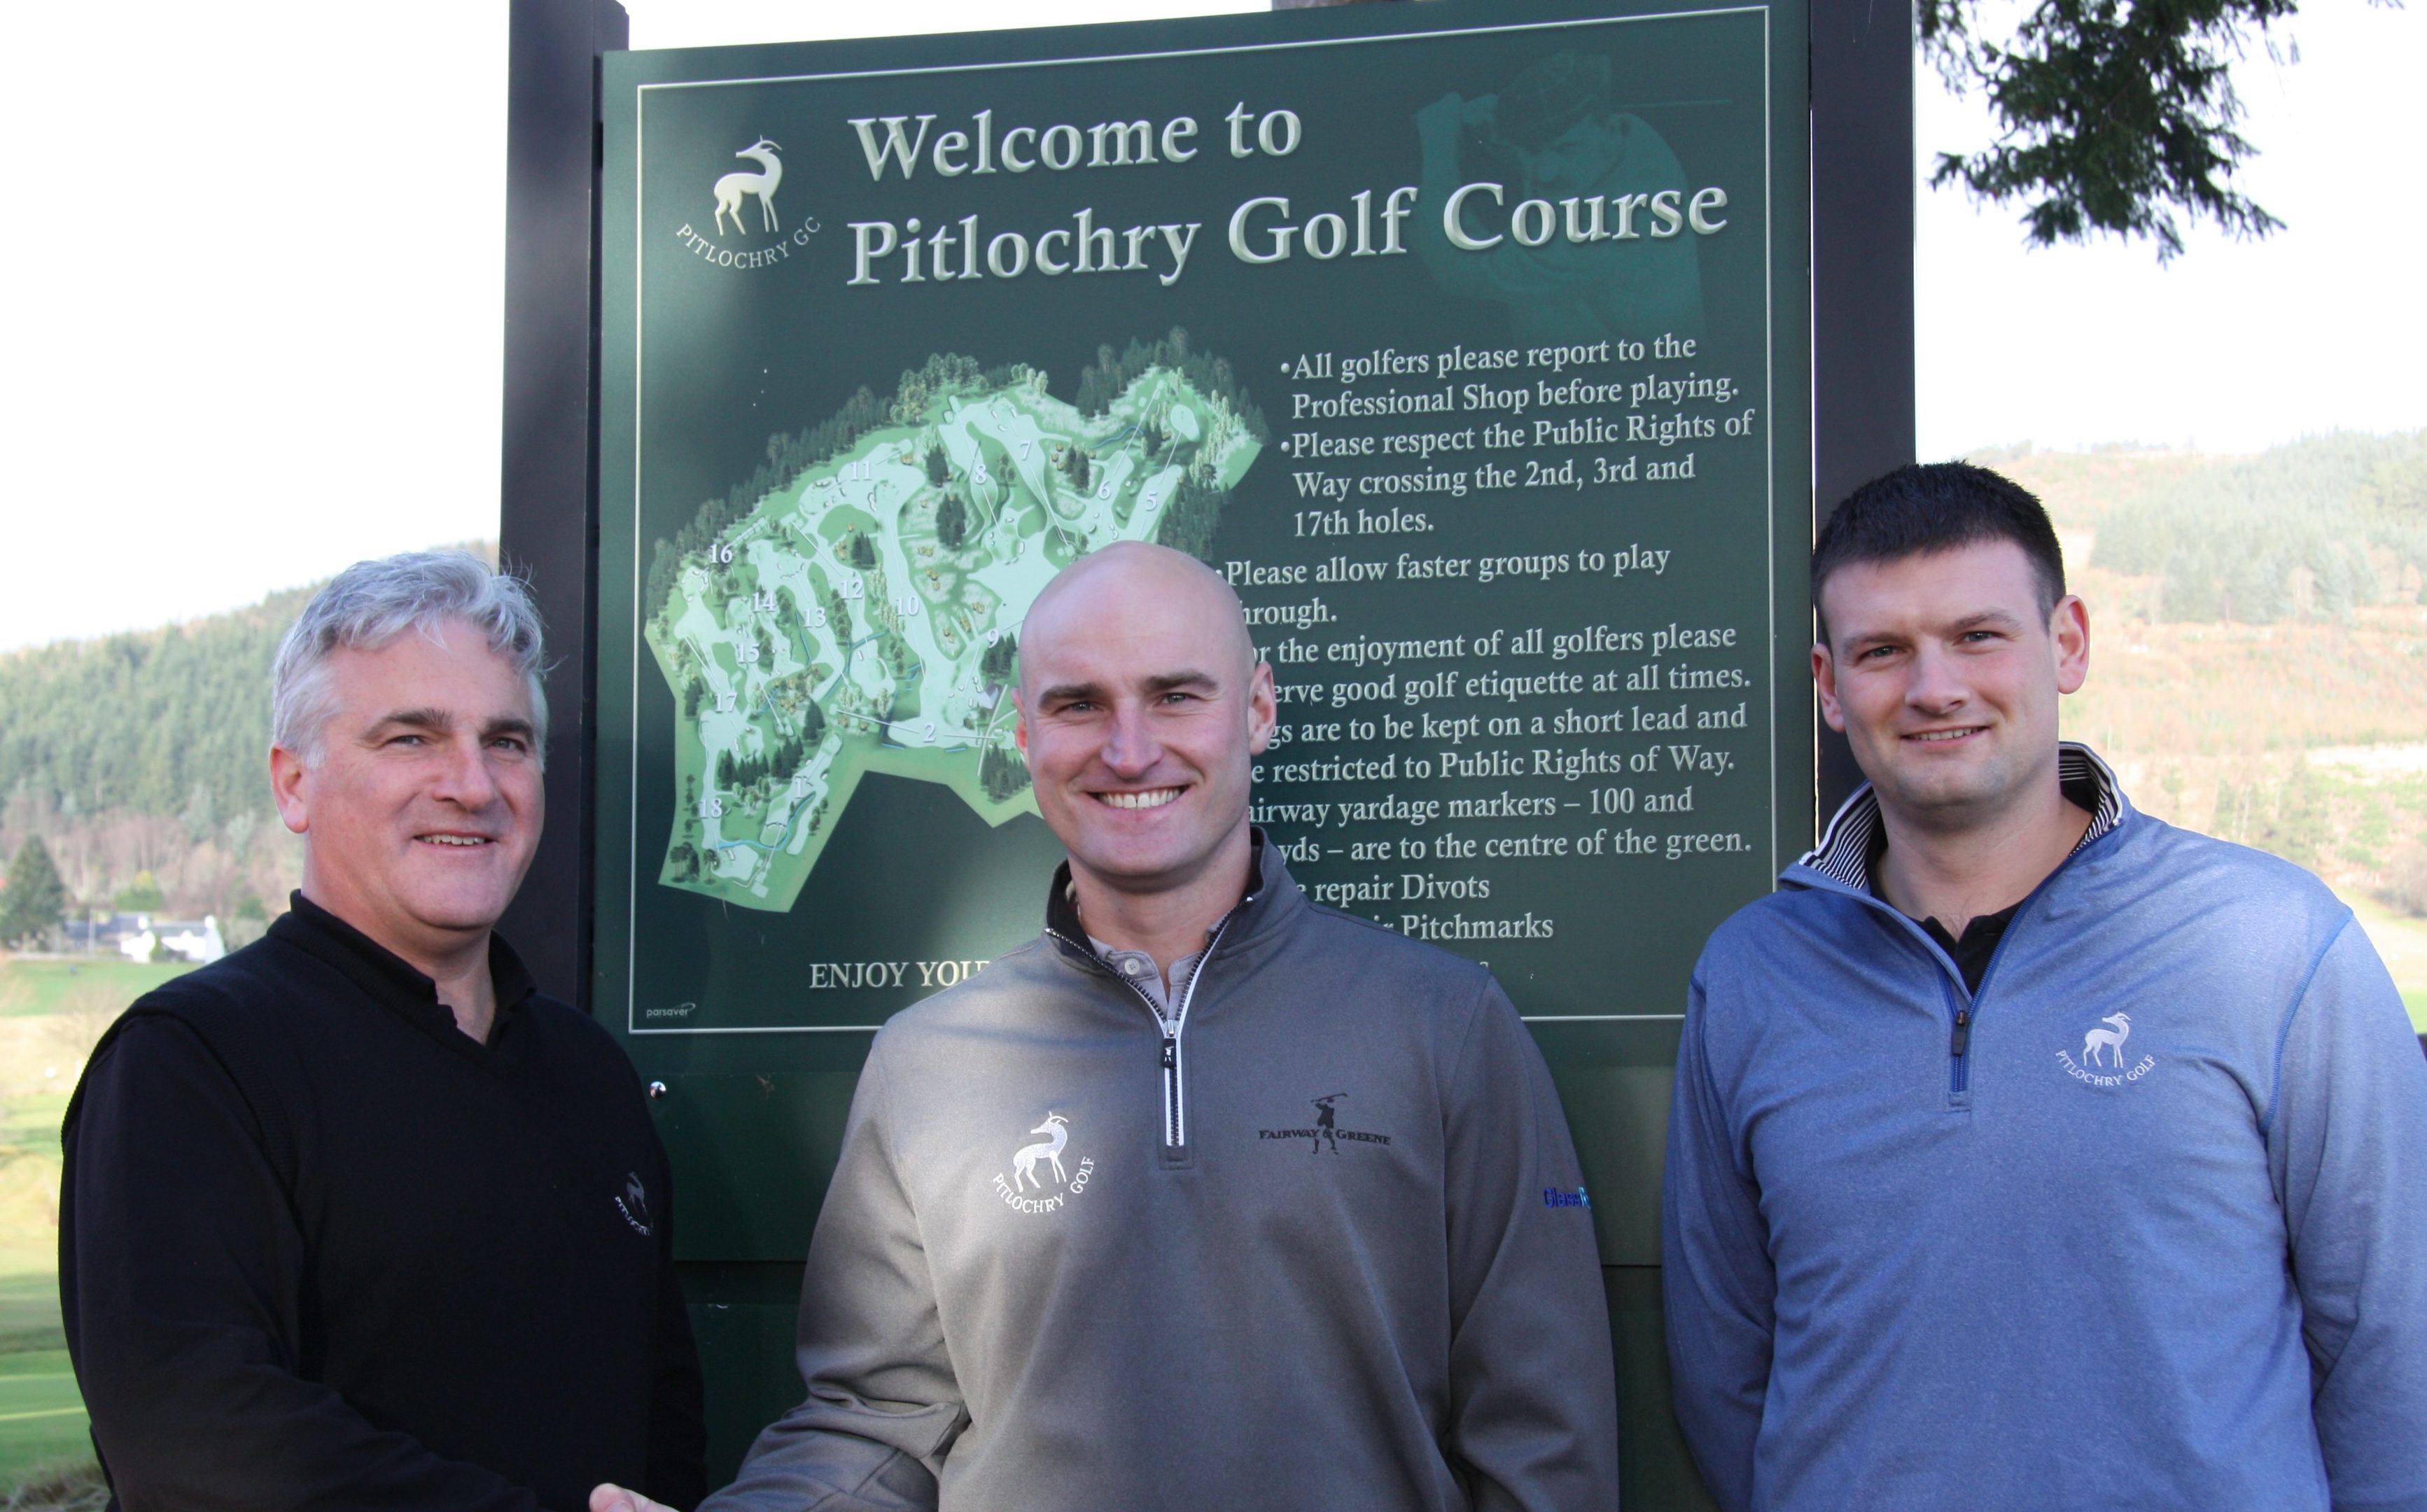 Wallace Booth (centre) with Pitlochry Golf directors Steve Carruthers (left) and Greg Carruthers.